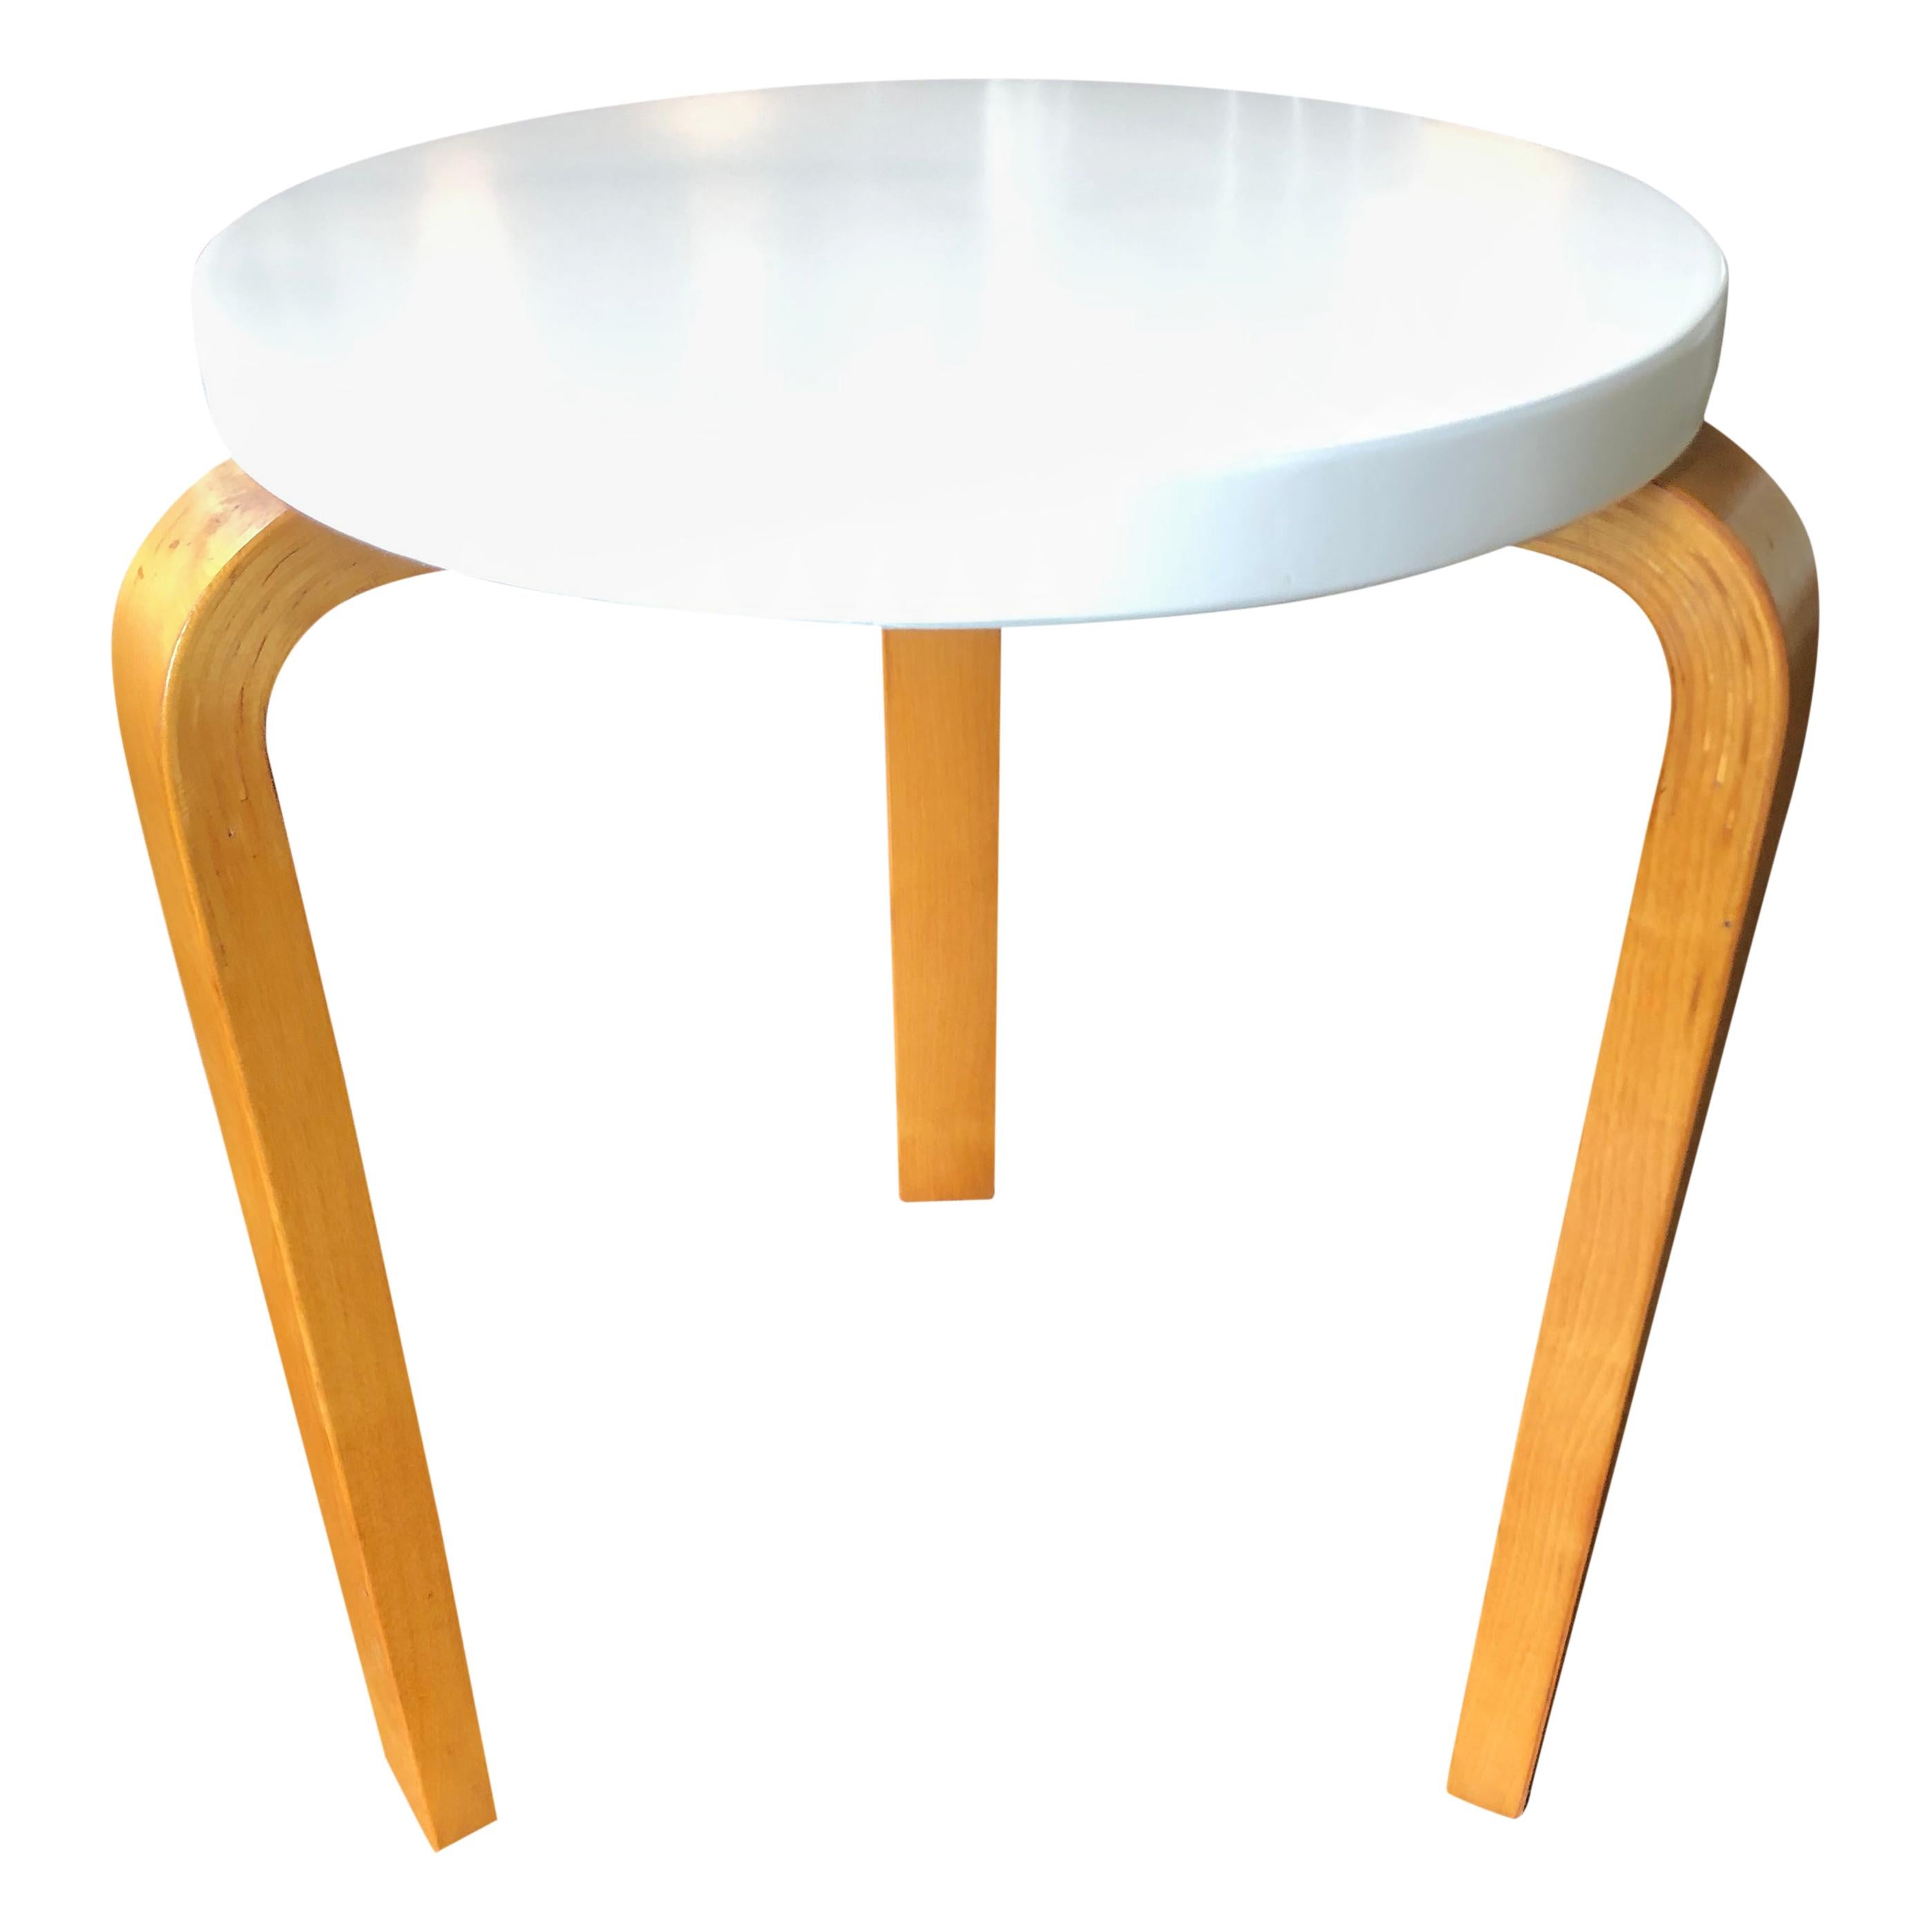 Alvar Aalto Early Finsven Stamped Stool / Small Table Lacquer Top